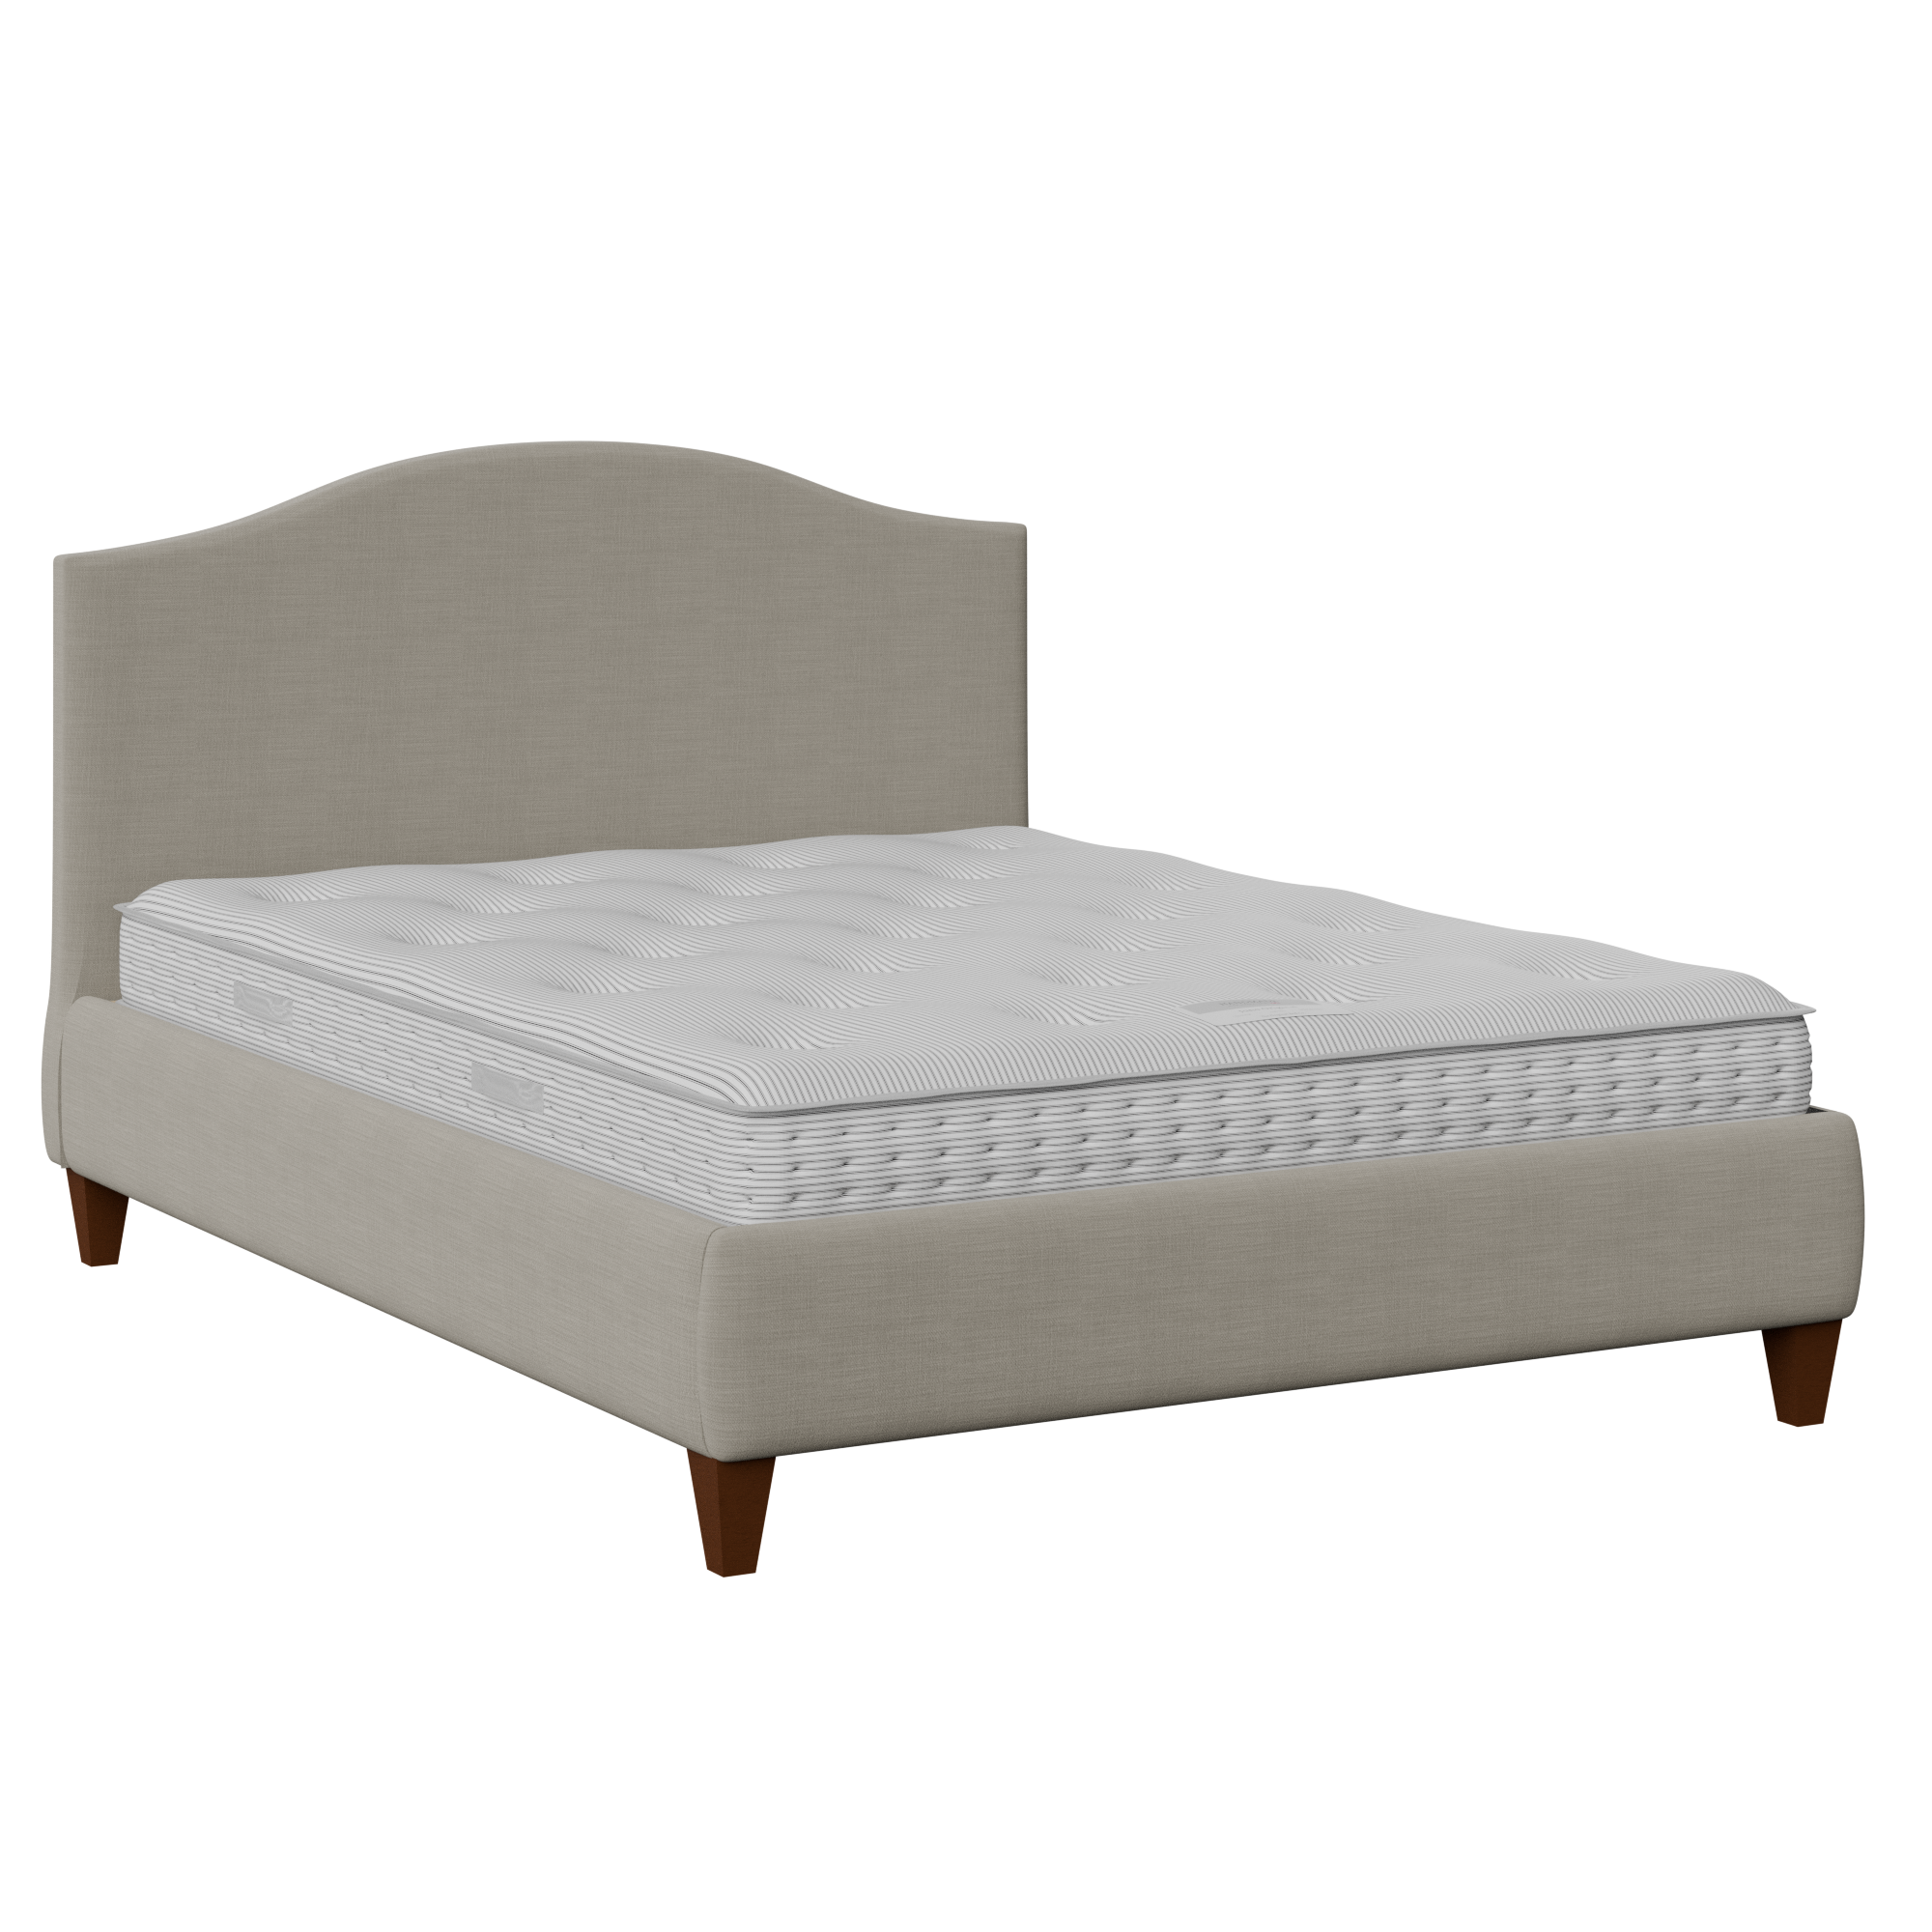 Daniella upholstered bed in grey fabric